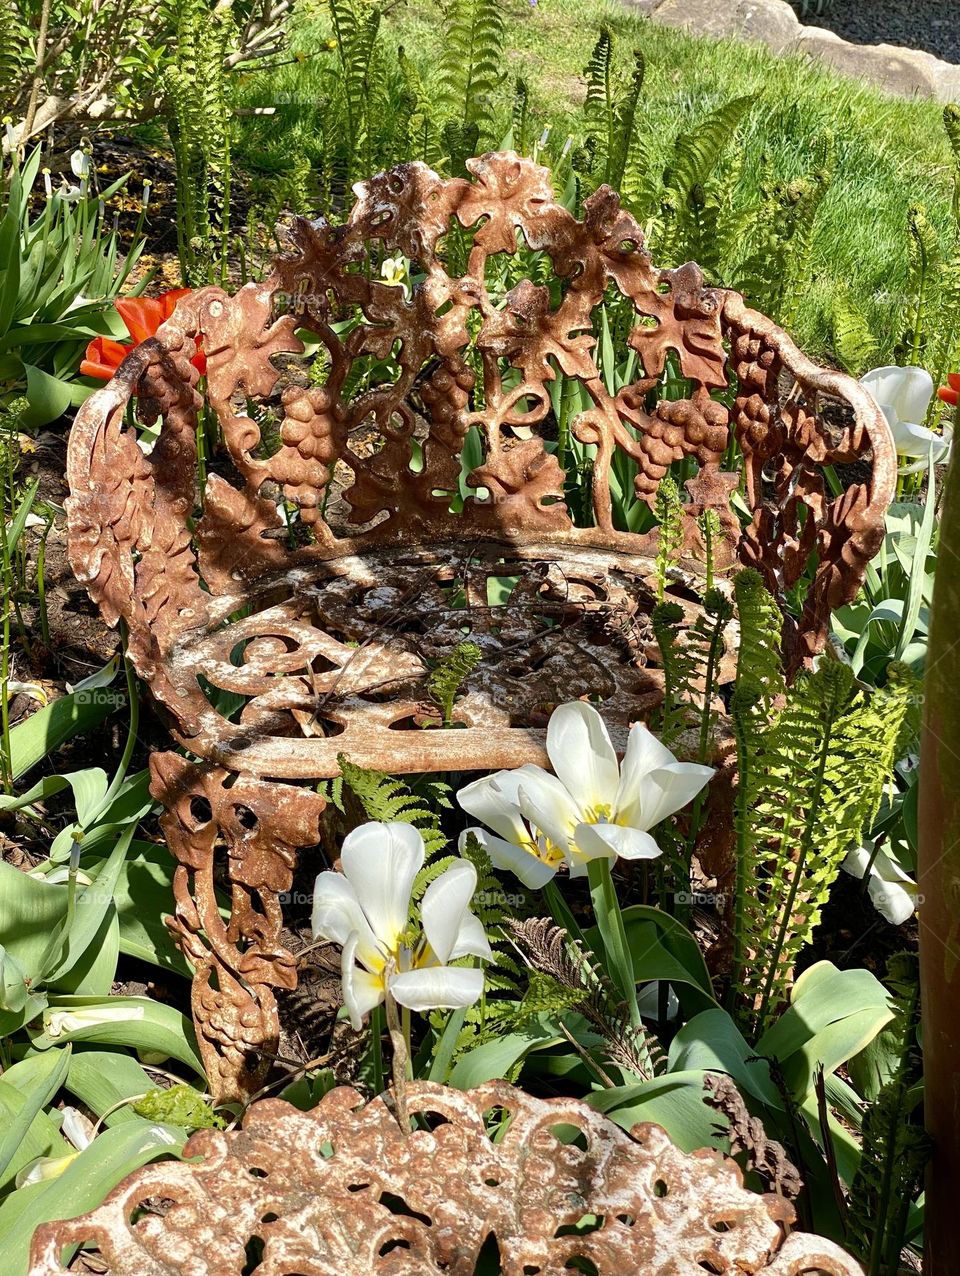 Tulips and ferns growing around a metal chair in a garden